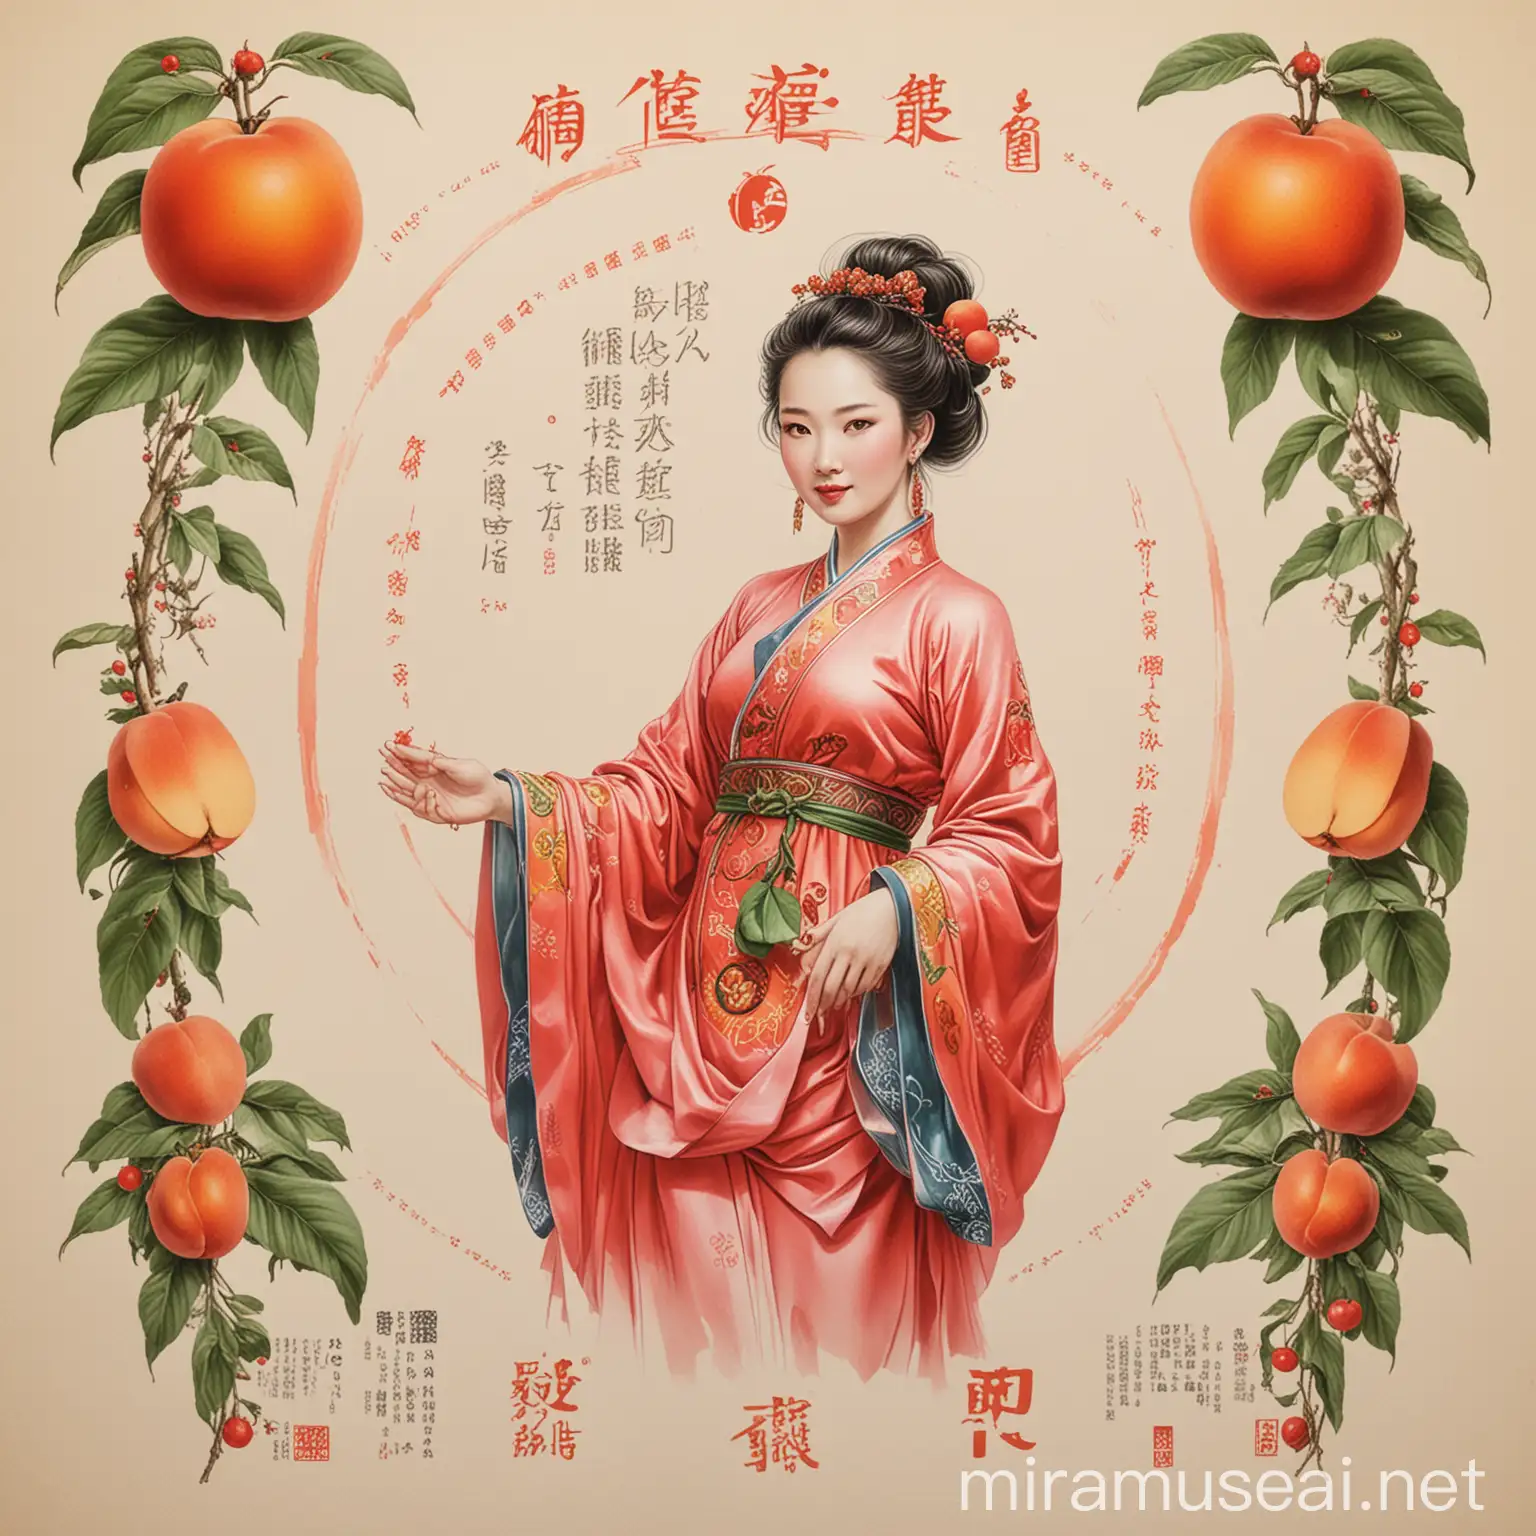 Beautiful to the east, shining without borders, from the beauty of the east to the west, Mao Geping's poster, which includes hand-drawn sketches of the Goddess of Peaches, as well as Mao Geping's brand logo and product images